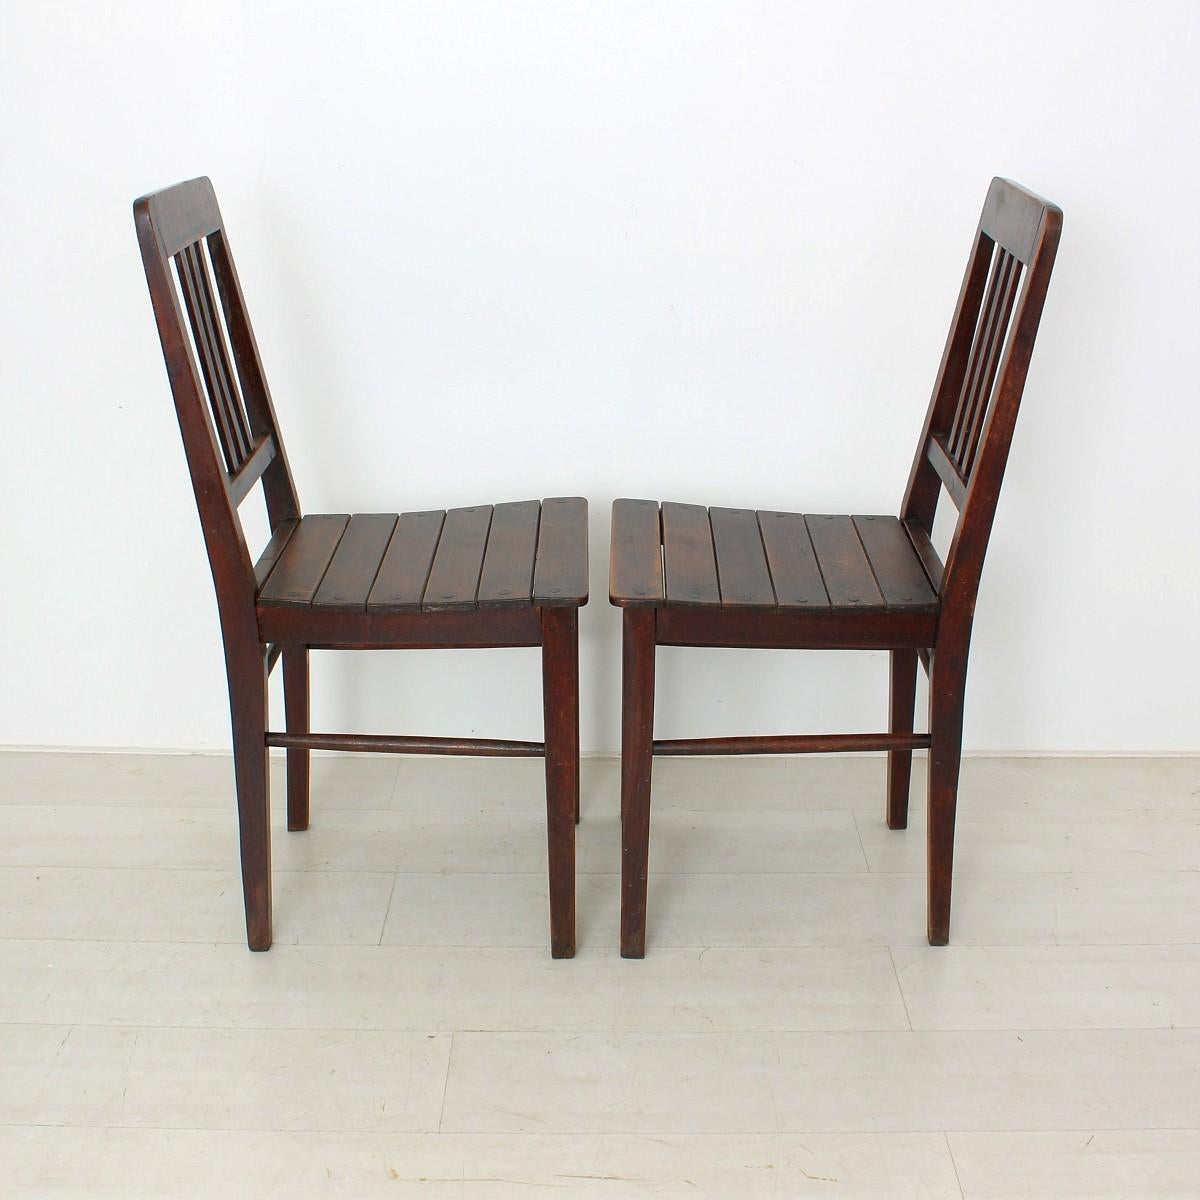 German Set of Two Vintage Wooden Chairs, circa 1920 For Sale